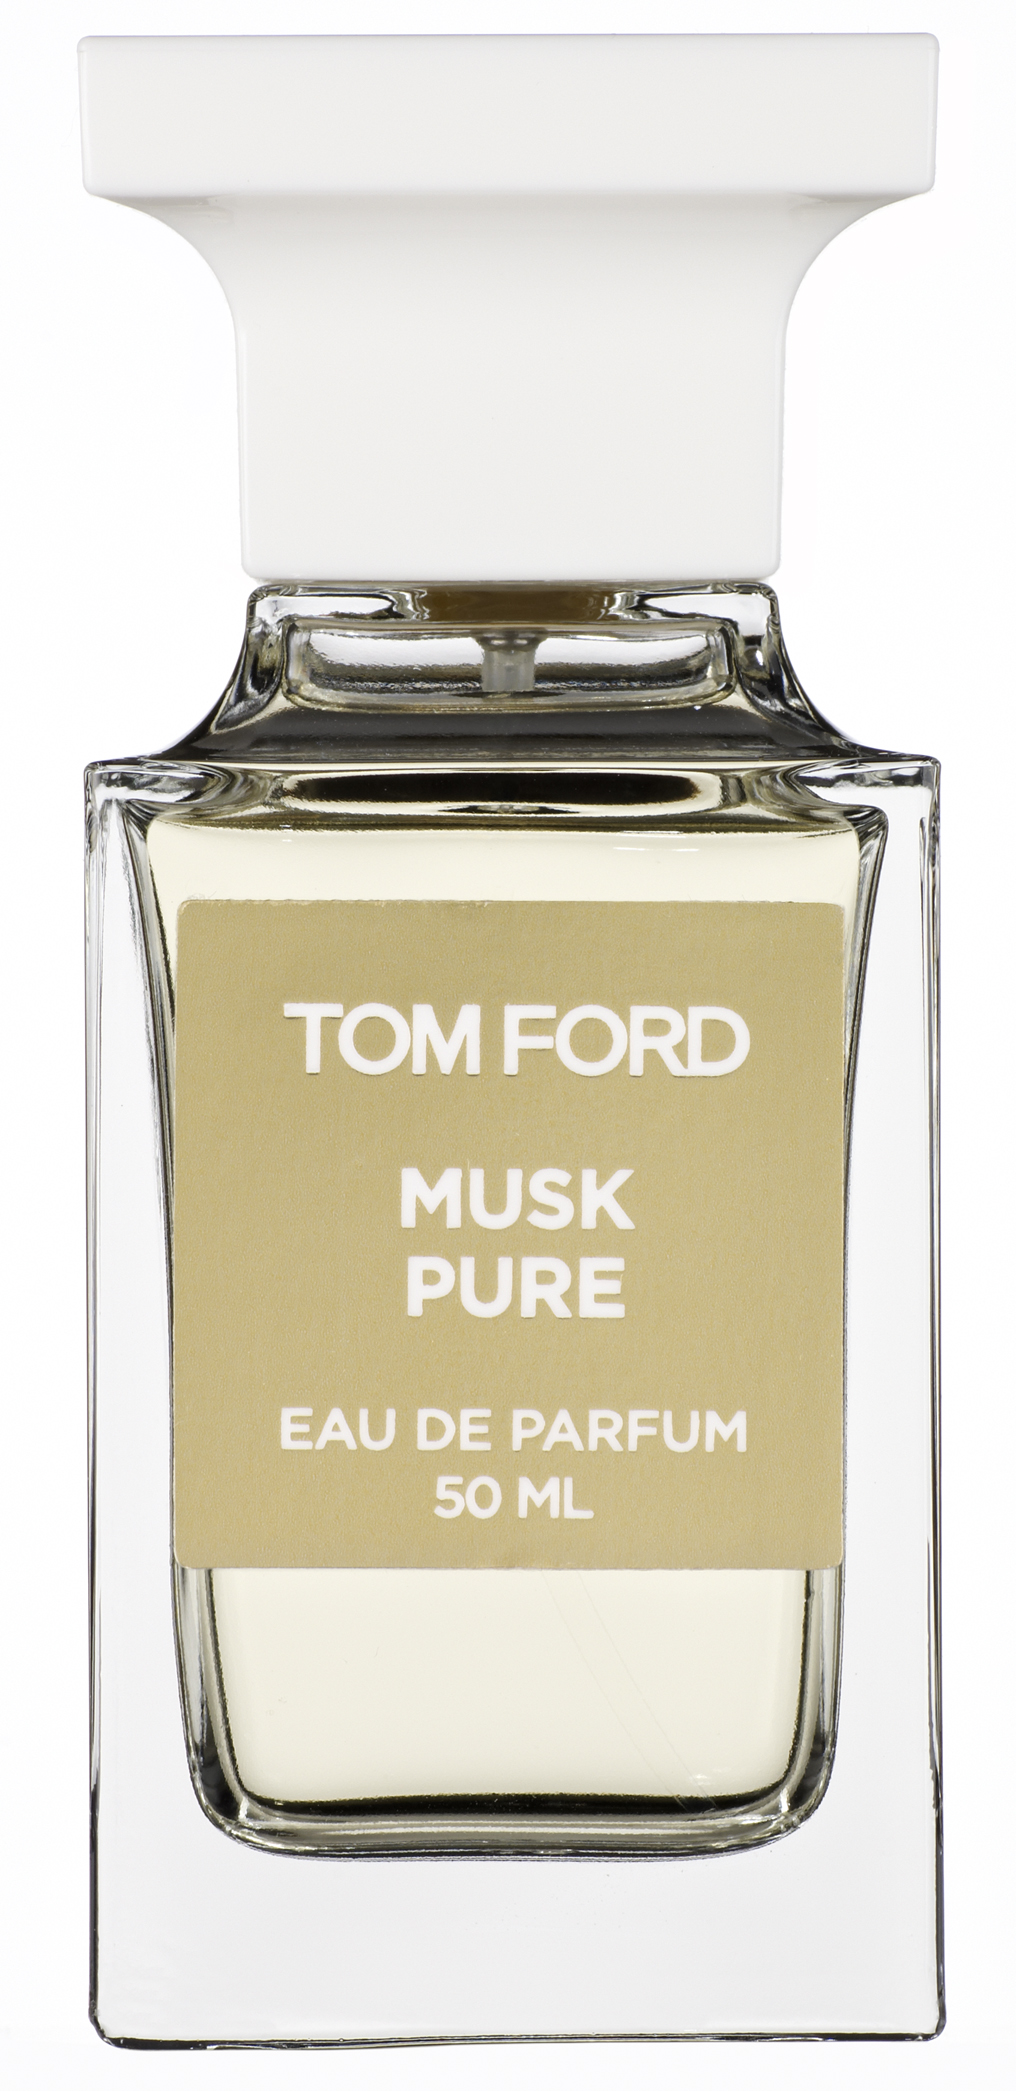 Tom ford musk pure review #4